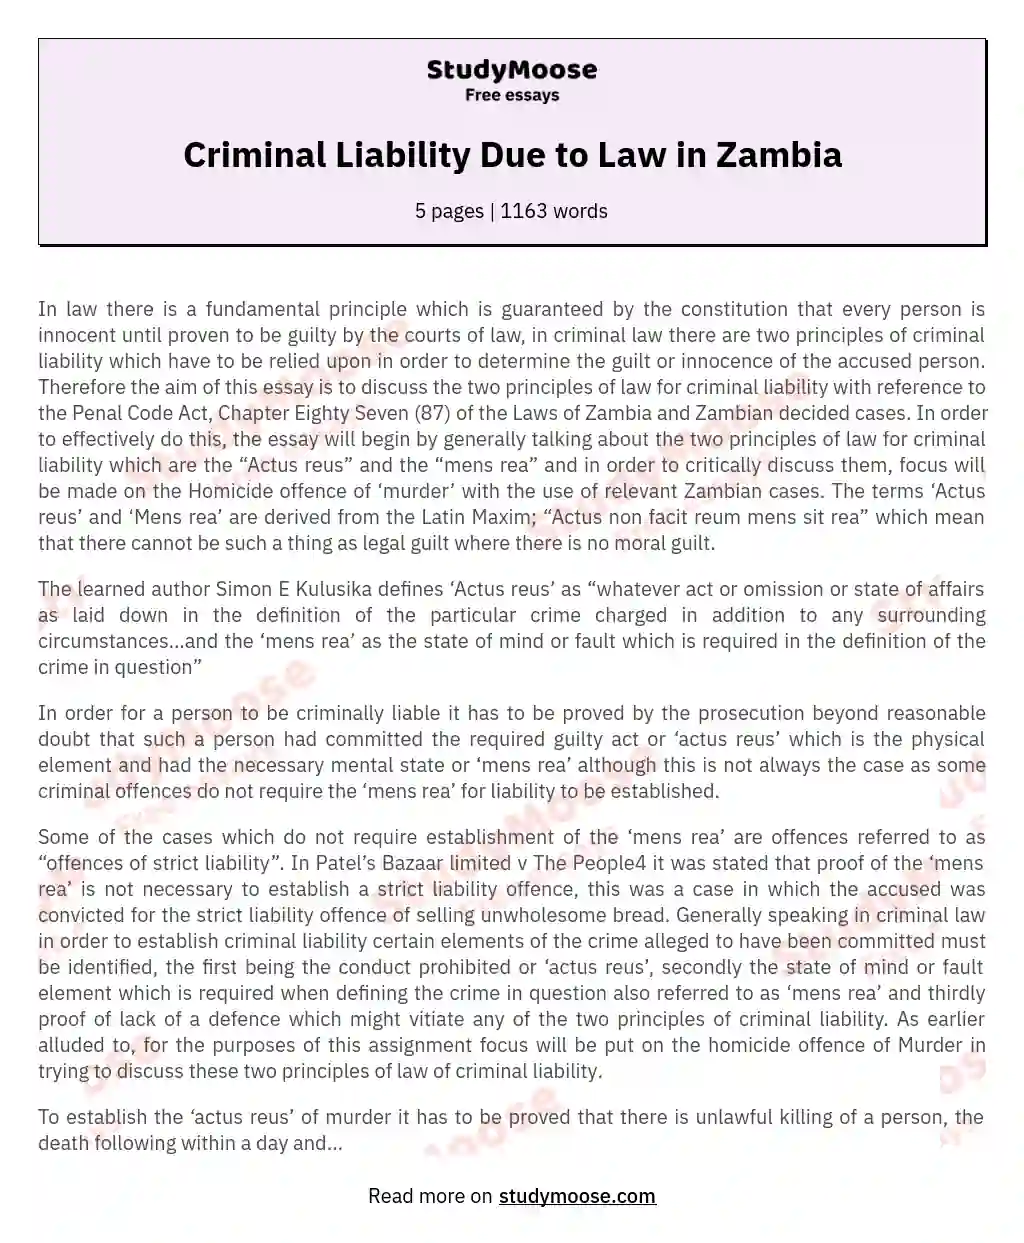 Criminal Liability Due to Law in Zambia essay